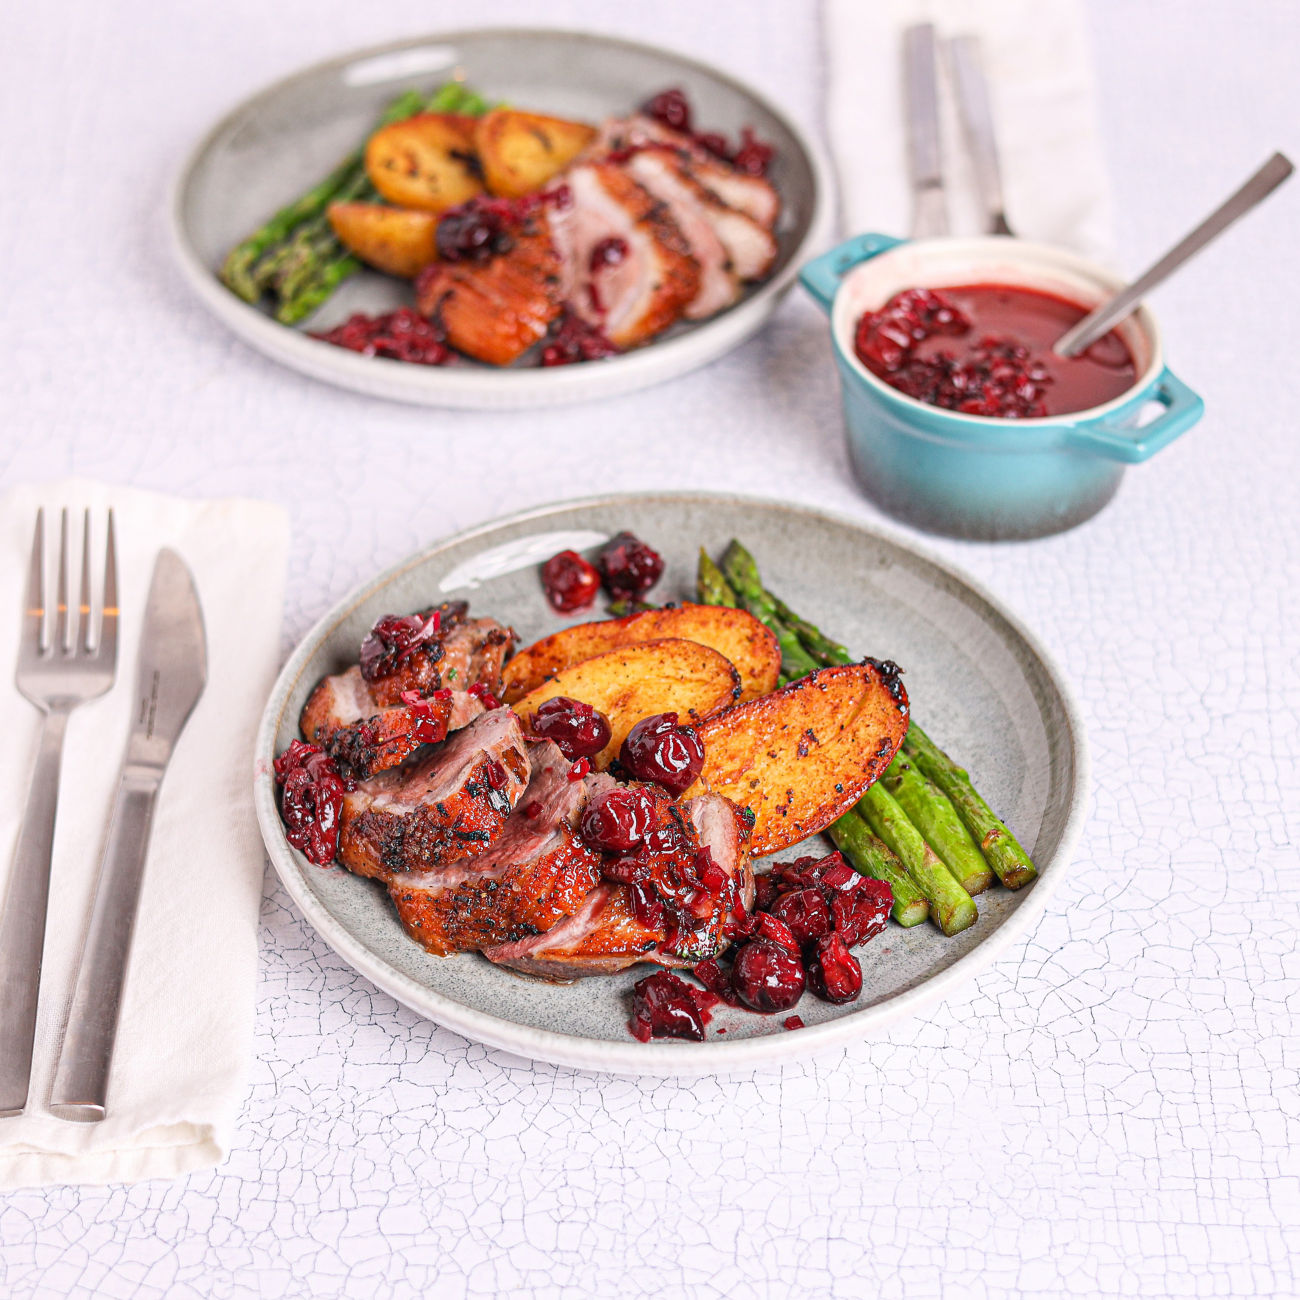 Roasted Duck With Plums Is the Rosh Hashanah Entrée You Need